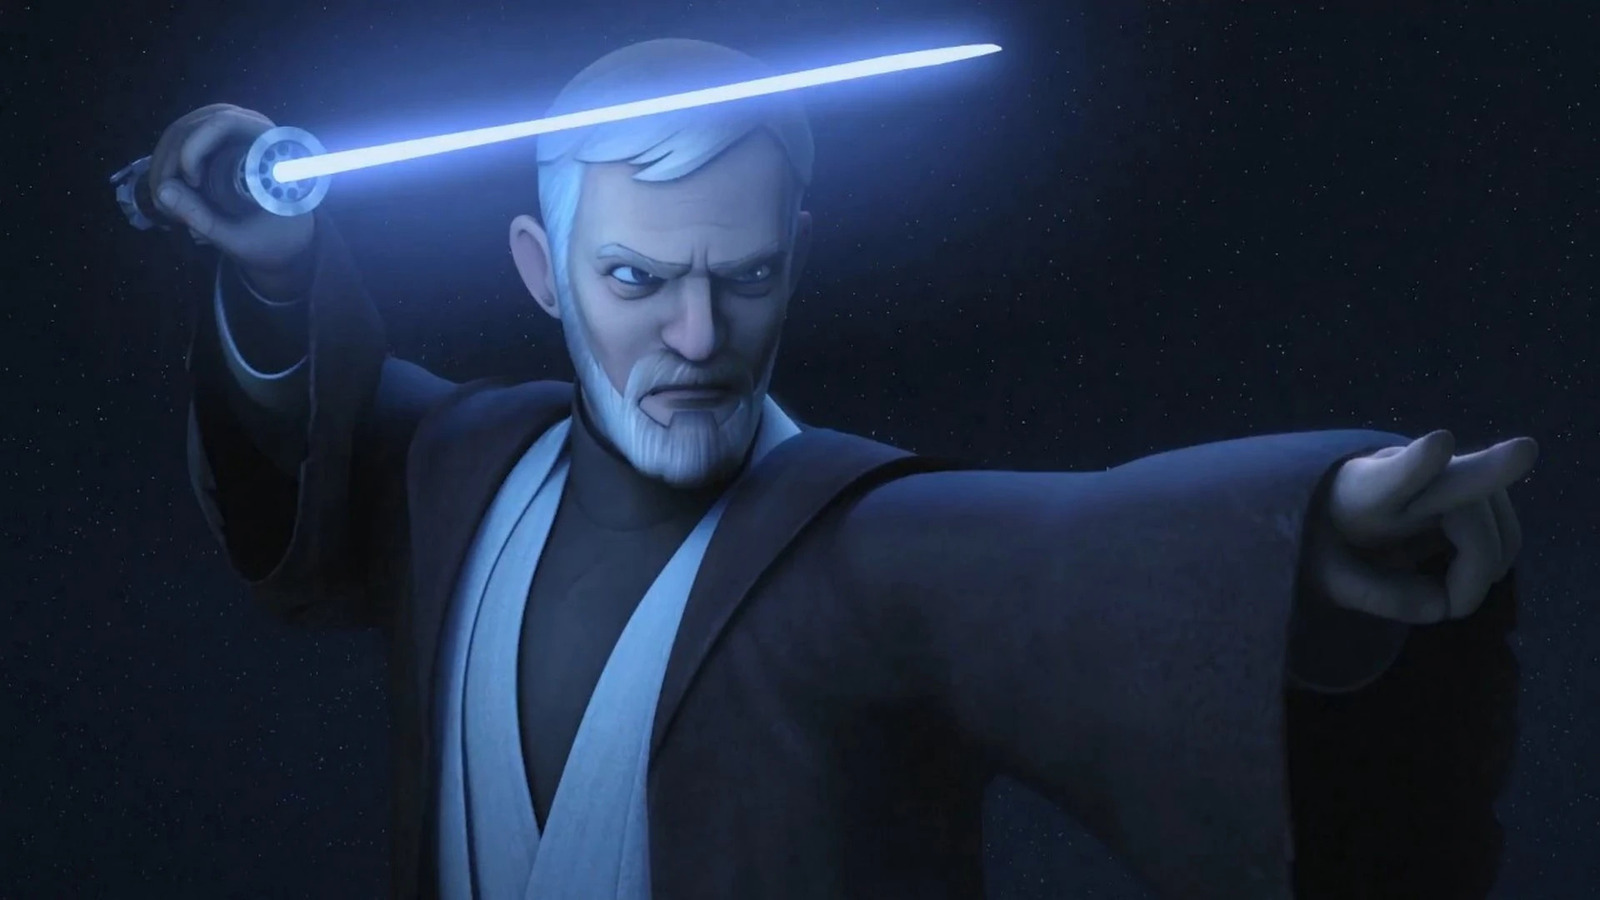 Obi-Wan’s Fighting Style In Rebels Is A Thoughtful, Evolutionary Star Wars Easter Egg